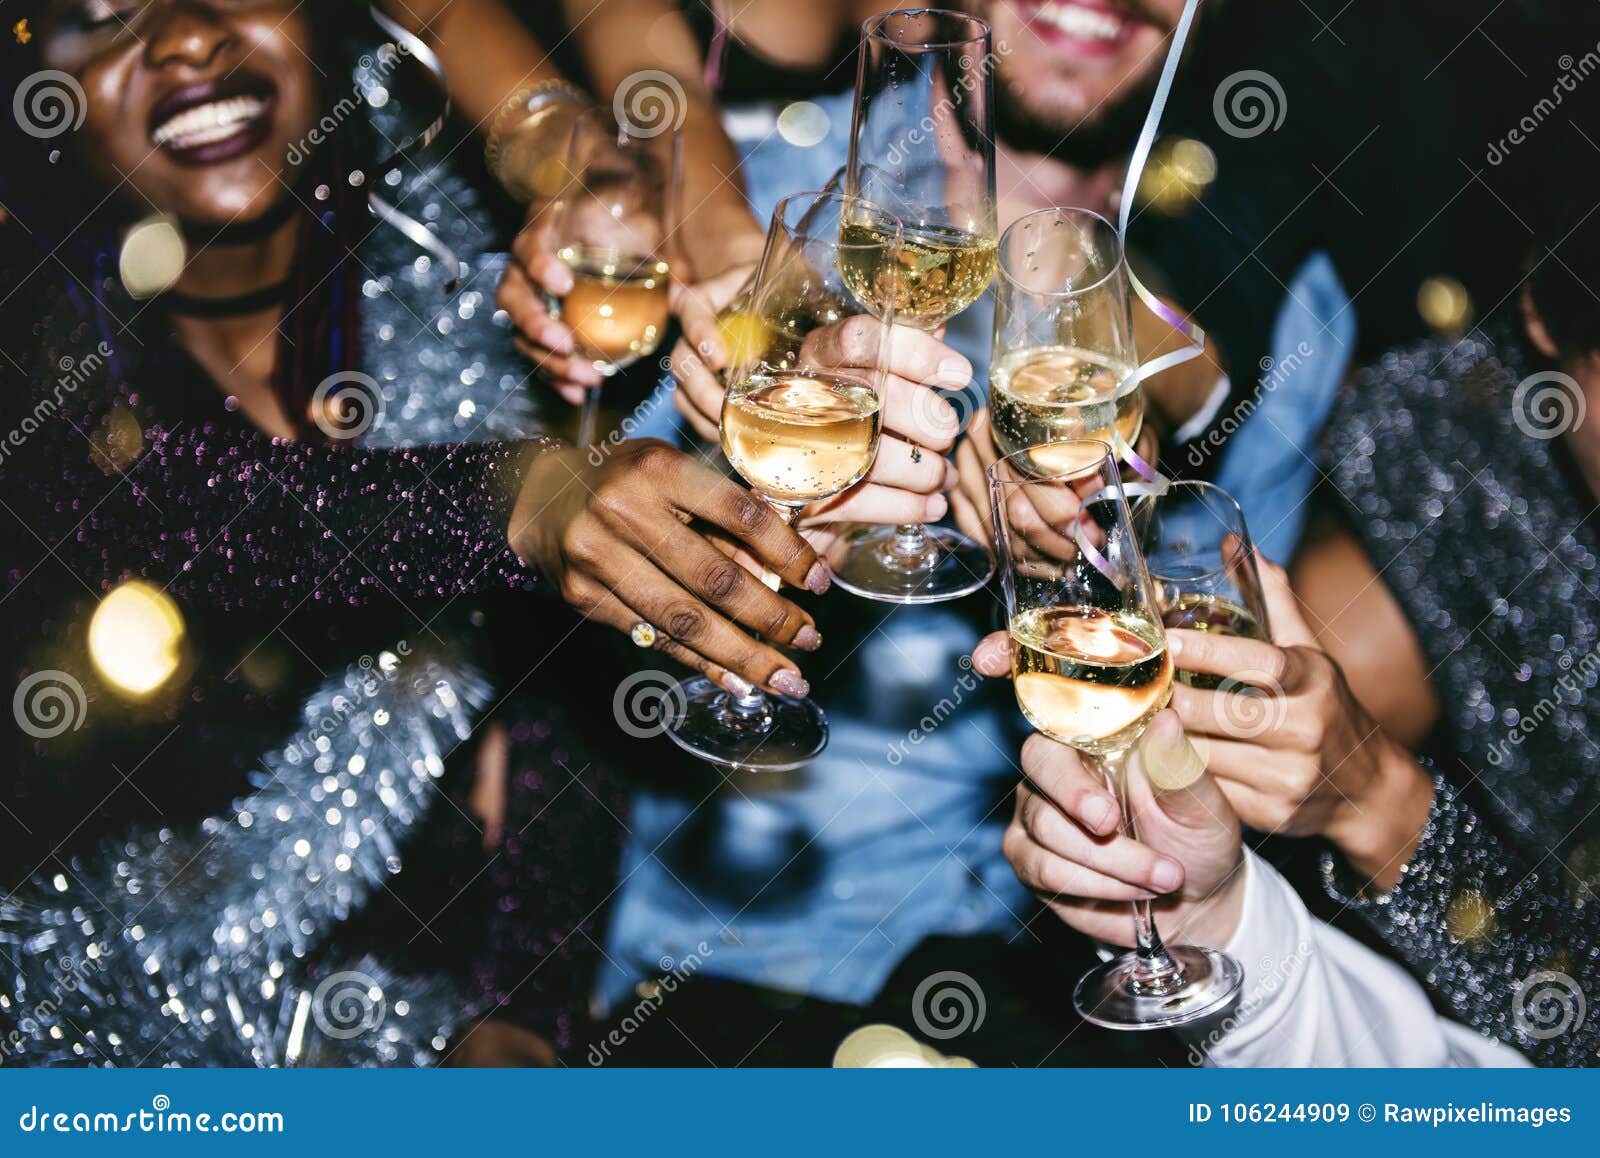 people celebrating in a party